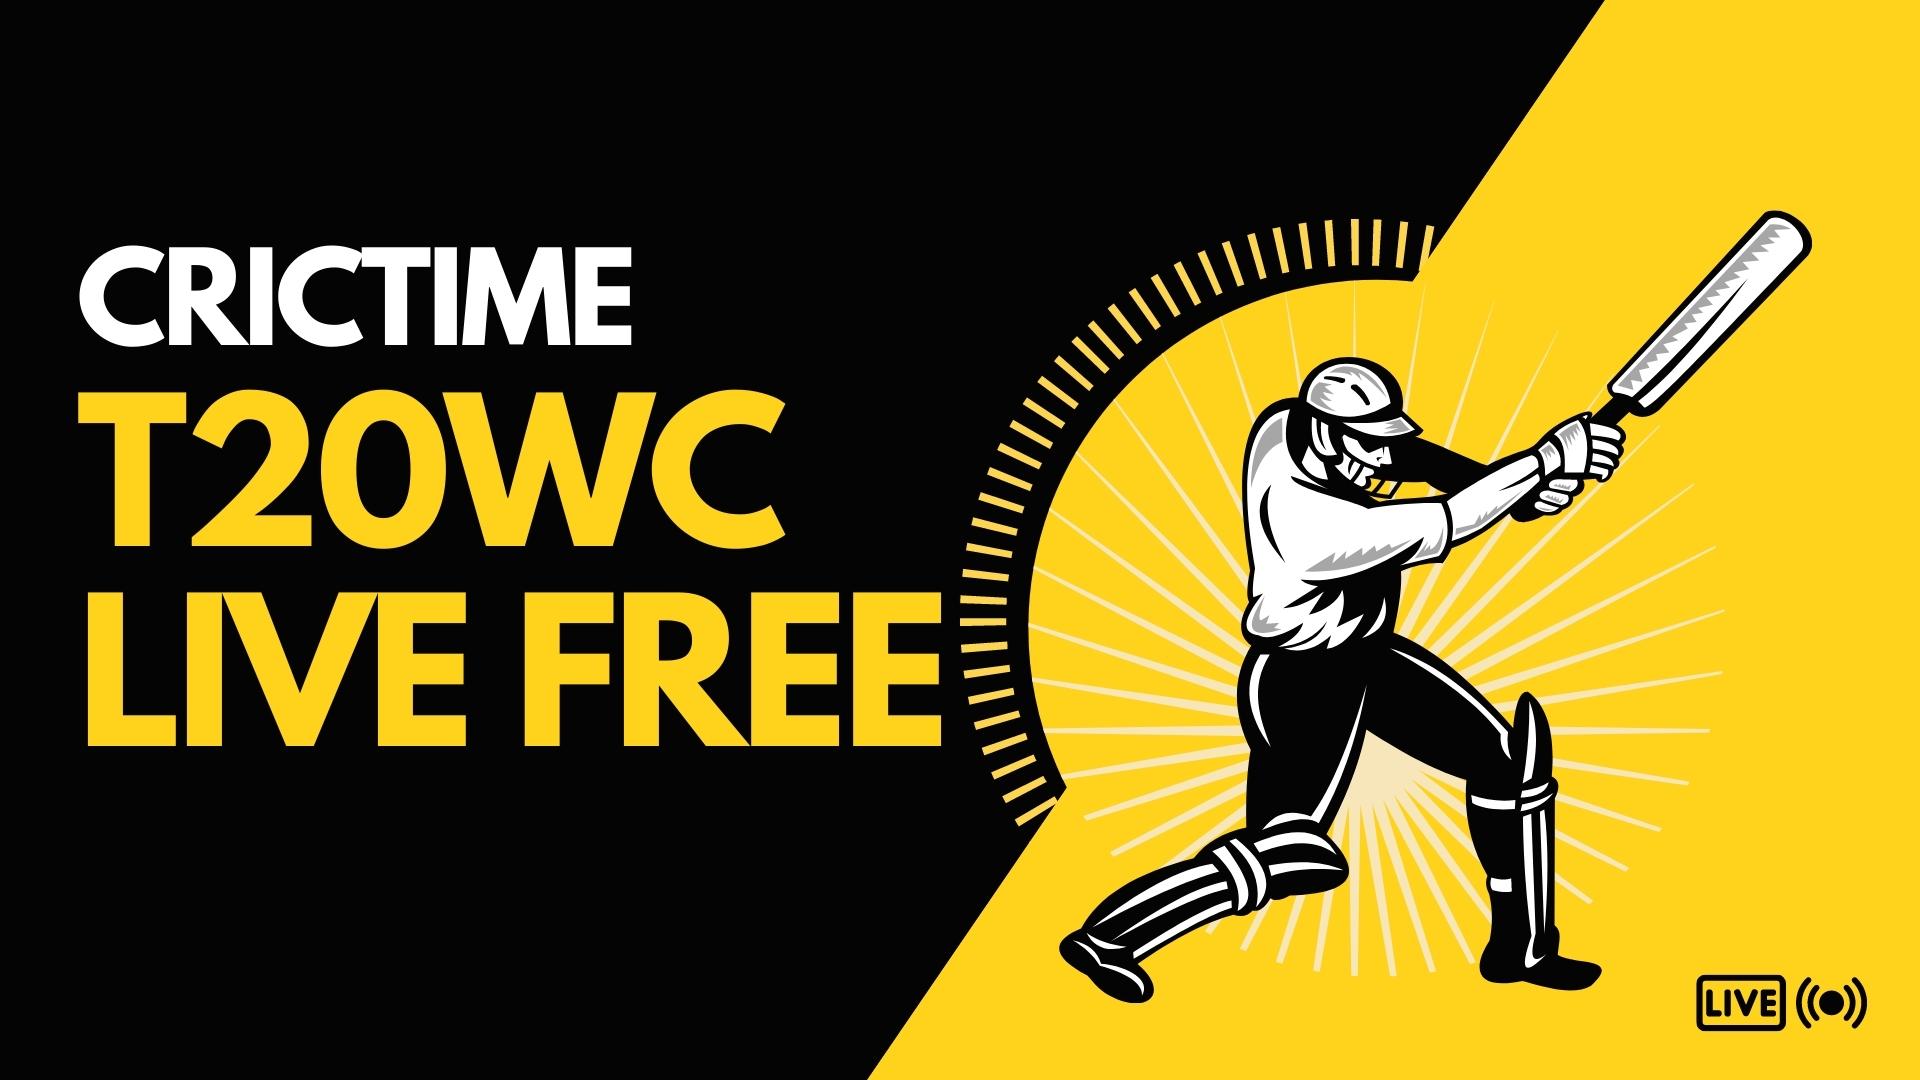 Crictime T20 World Cup Live Streaming FREE- T20WC Matches on Crictime.com